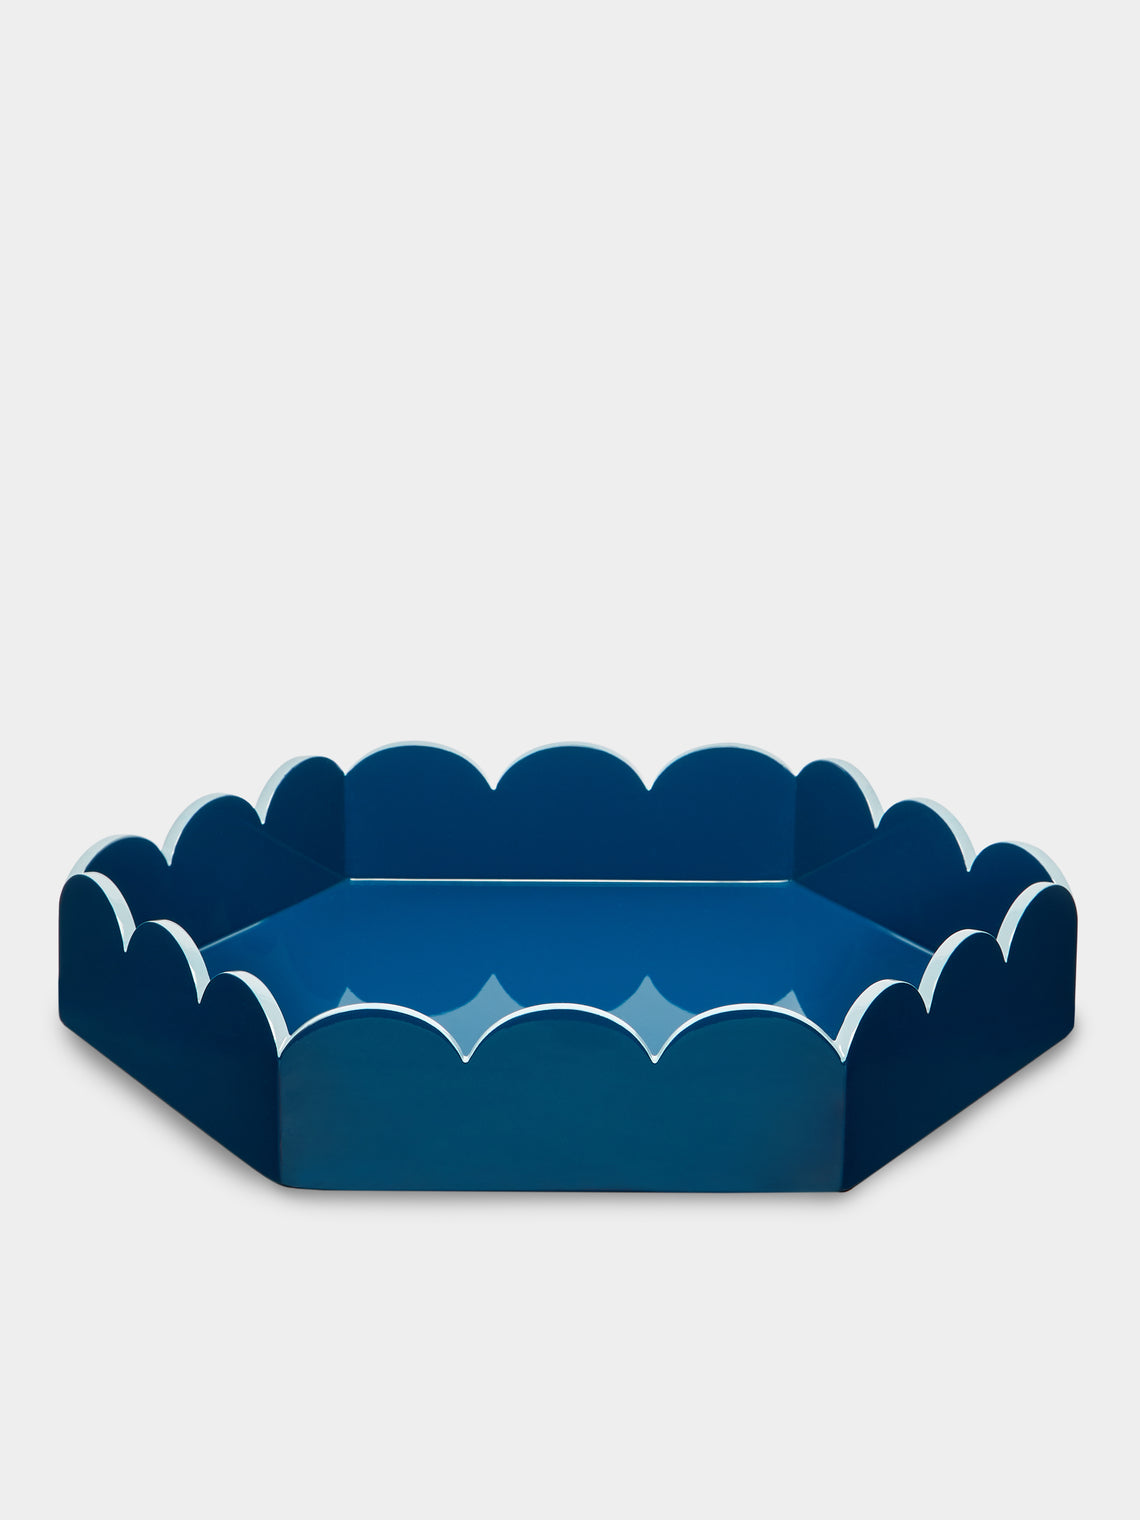 Scarlett And Sallis - Lacquered Wood Large Scalloped Tray -  - ABASK